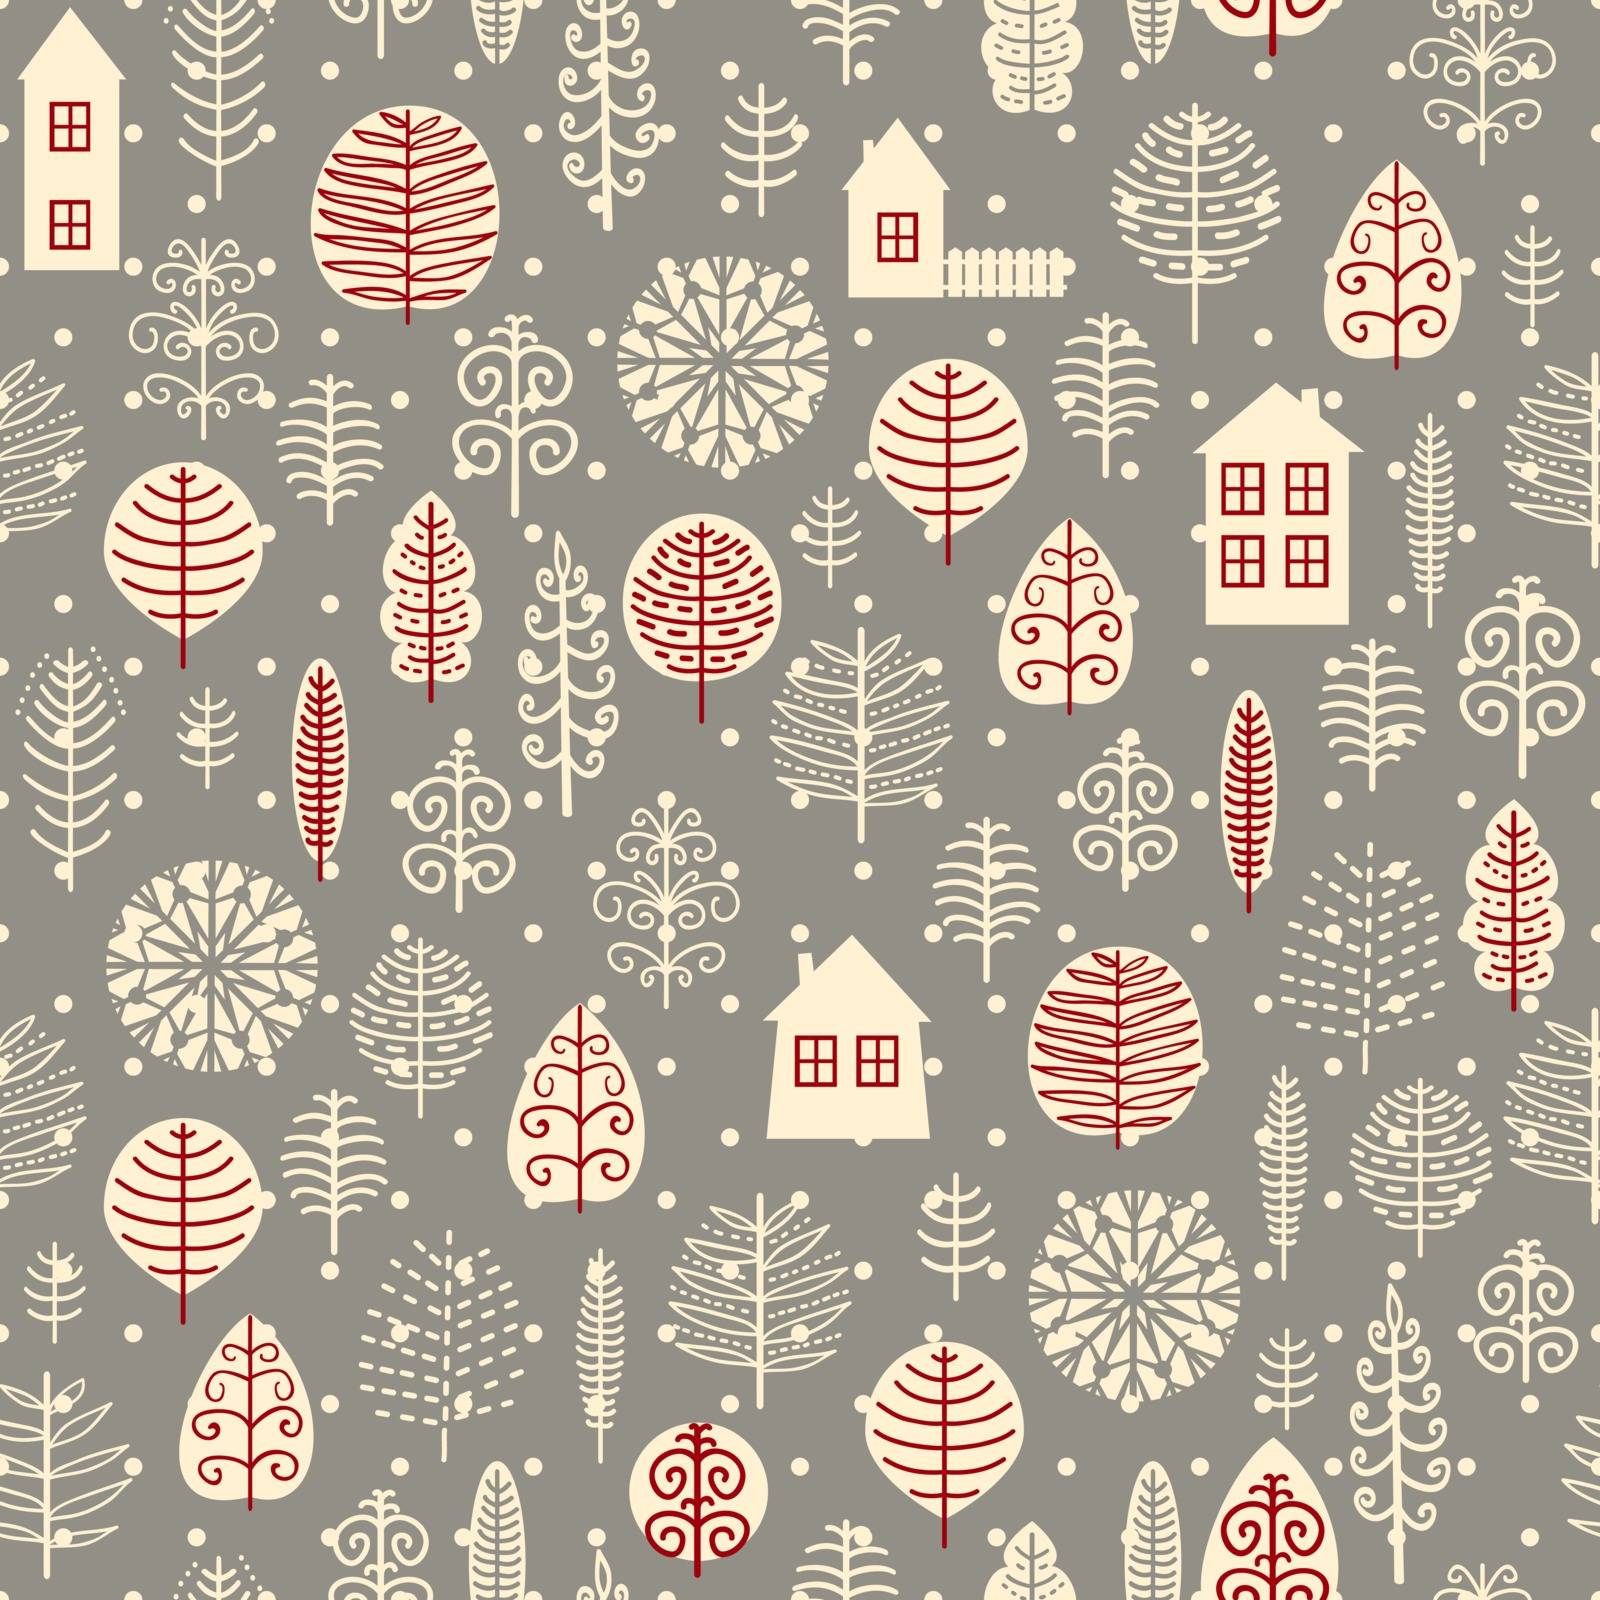 Christmas pattern by kartyl